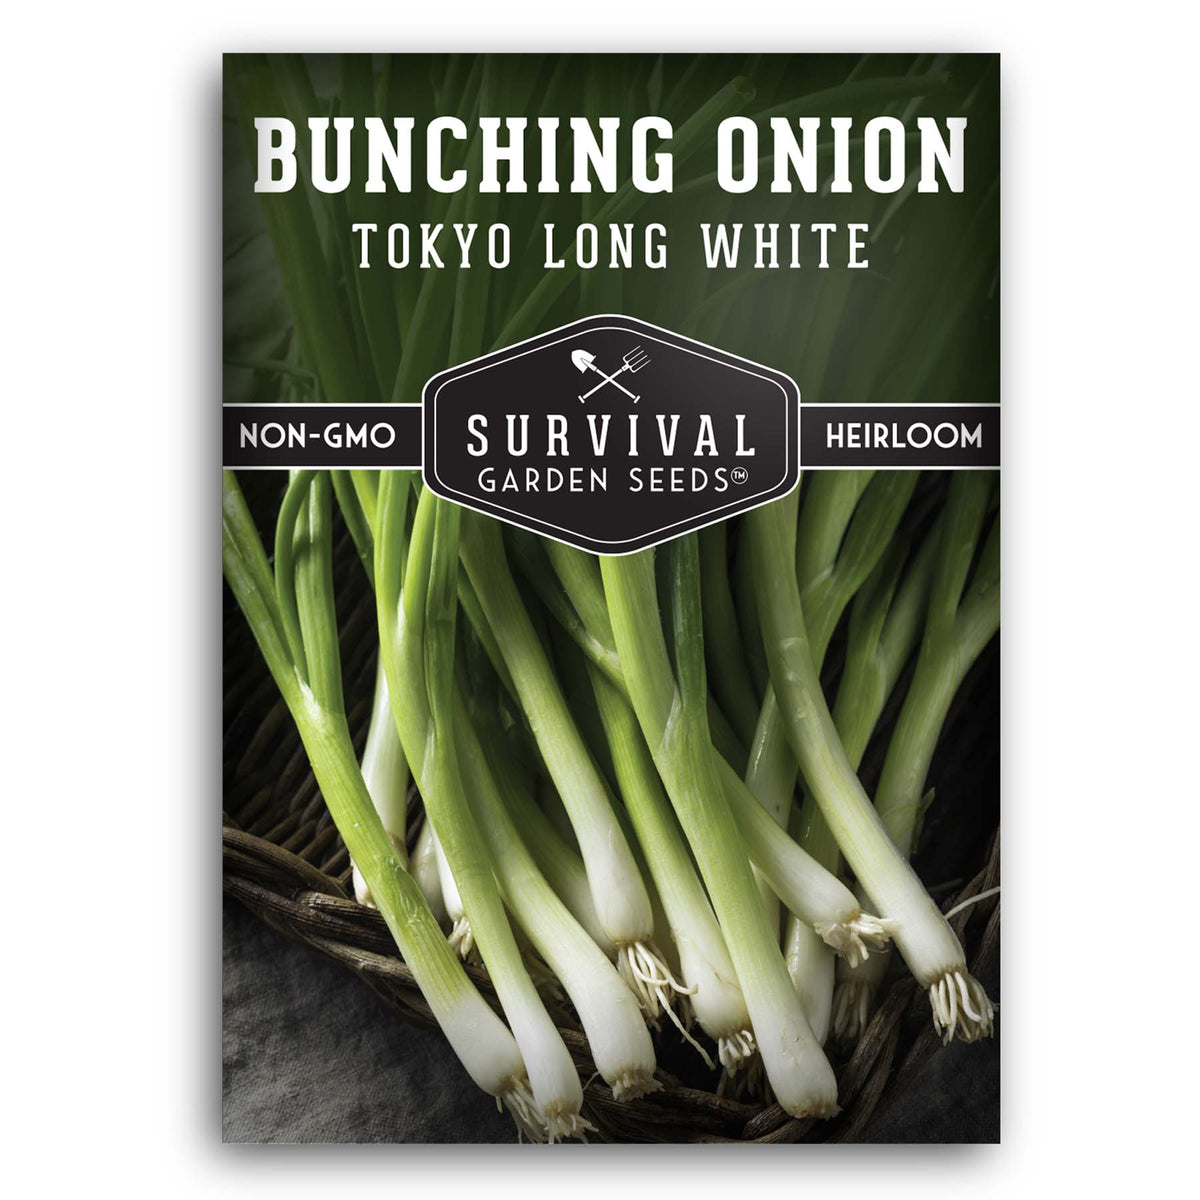 Tokyo Long White Bunching Onion seeds for planting